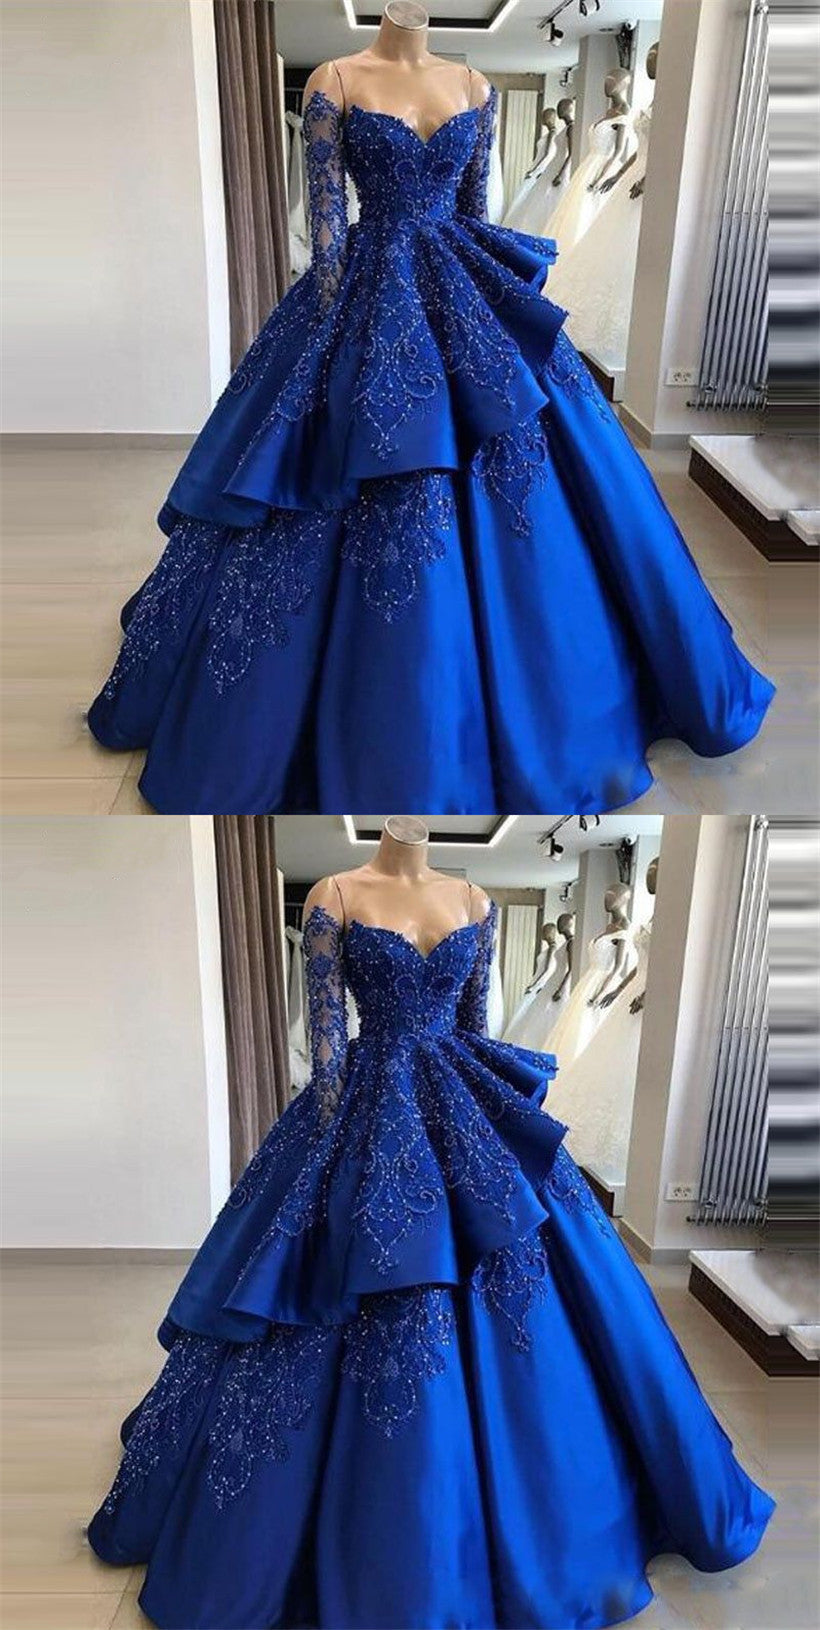 LTP0599,Charming royal blue prom dresses beaded long sleeves sweet 16 ball gown